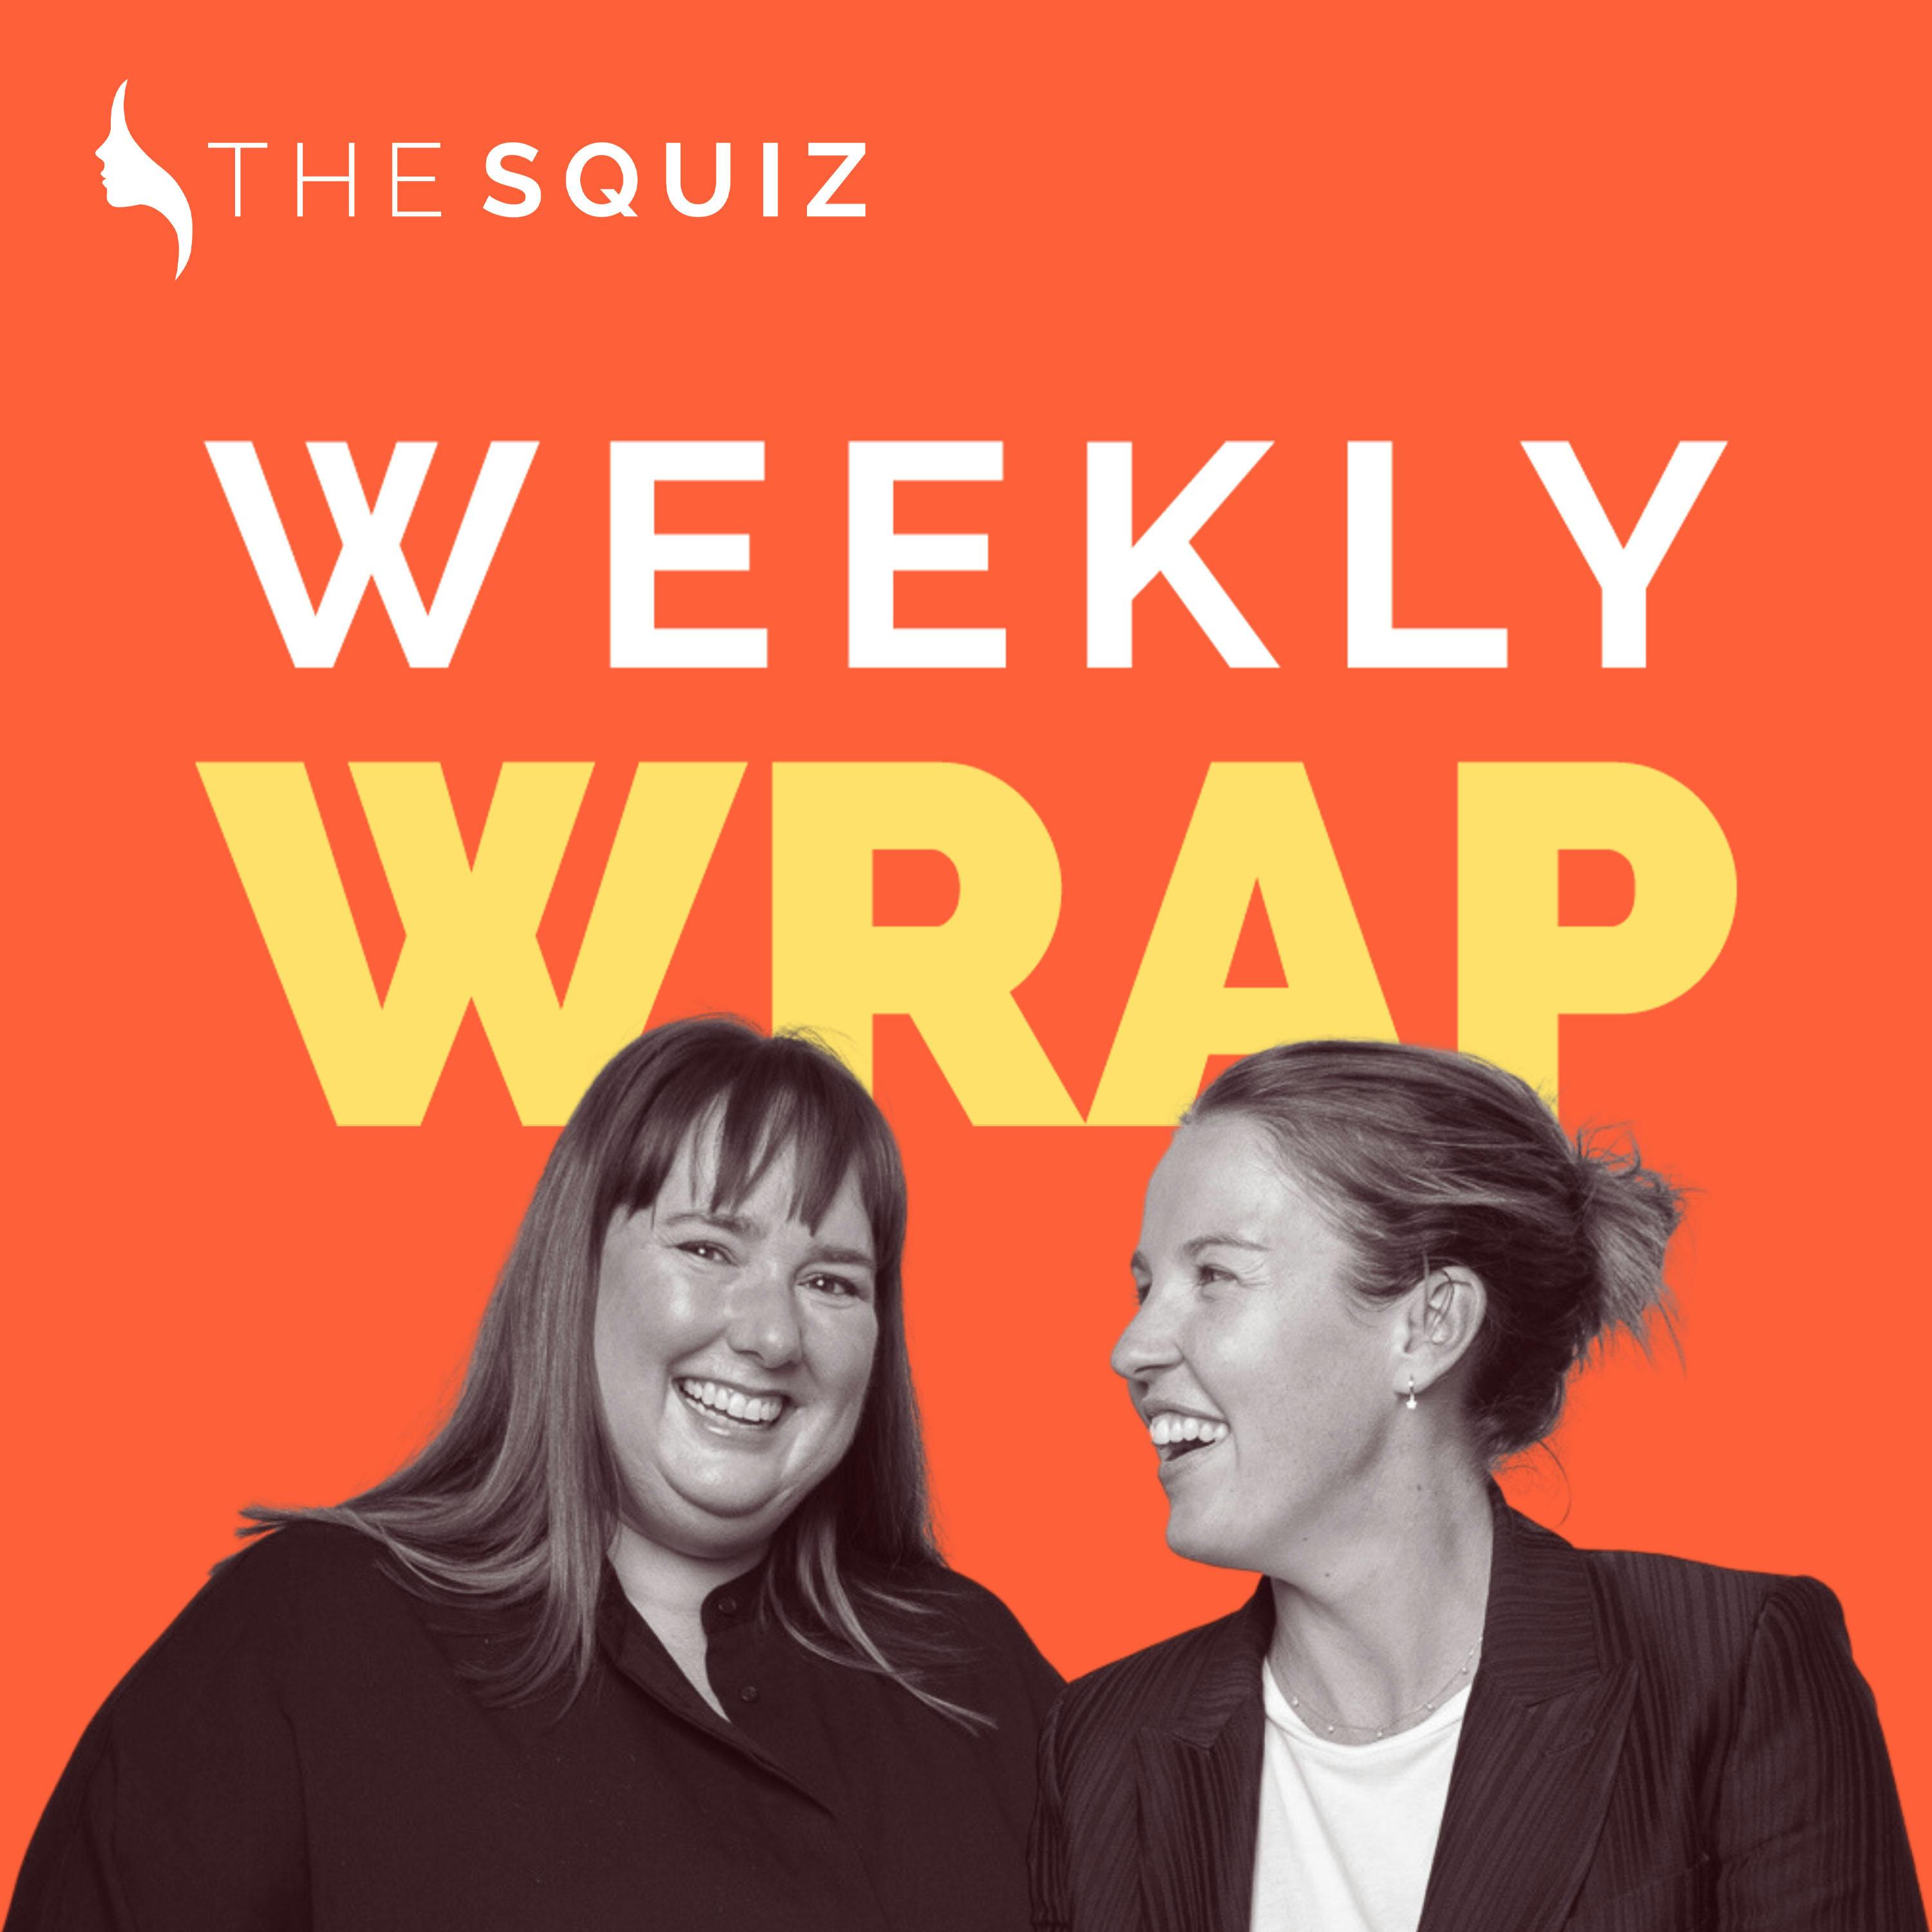 Weekly Wrap: Bruce Lehrmann v. Network Ten, Aussie journos pen a letter, and a tunnelling hero